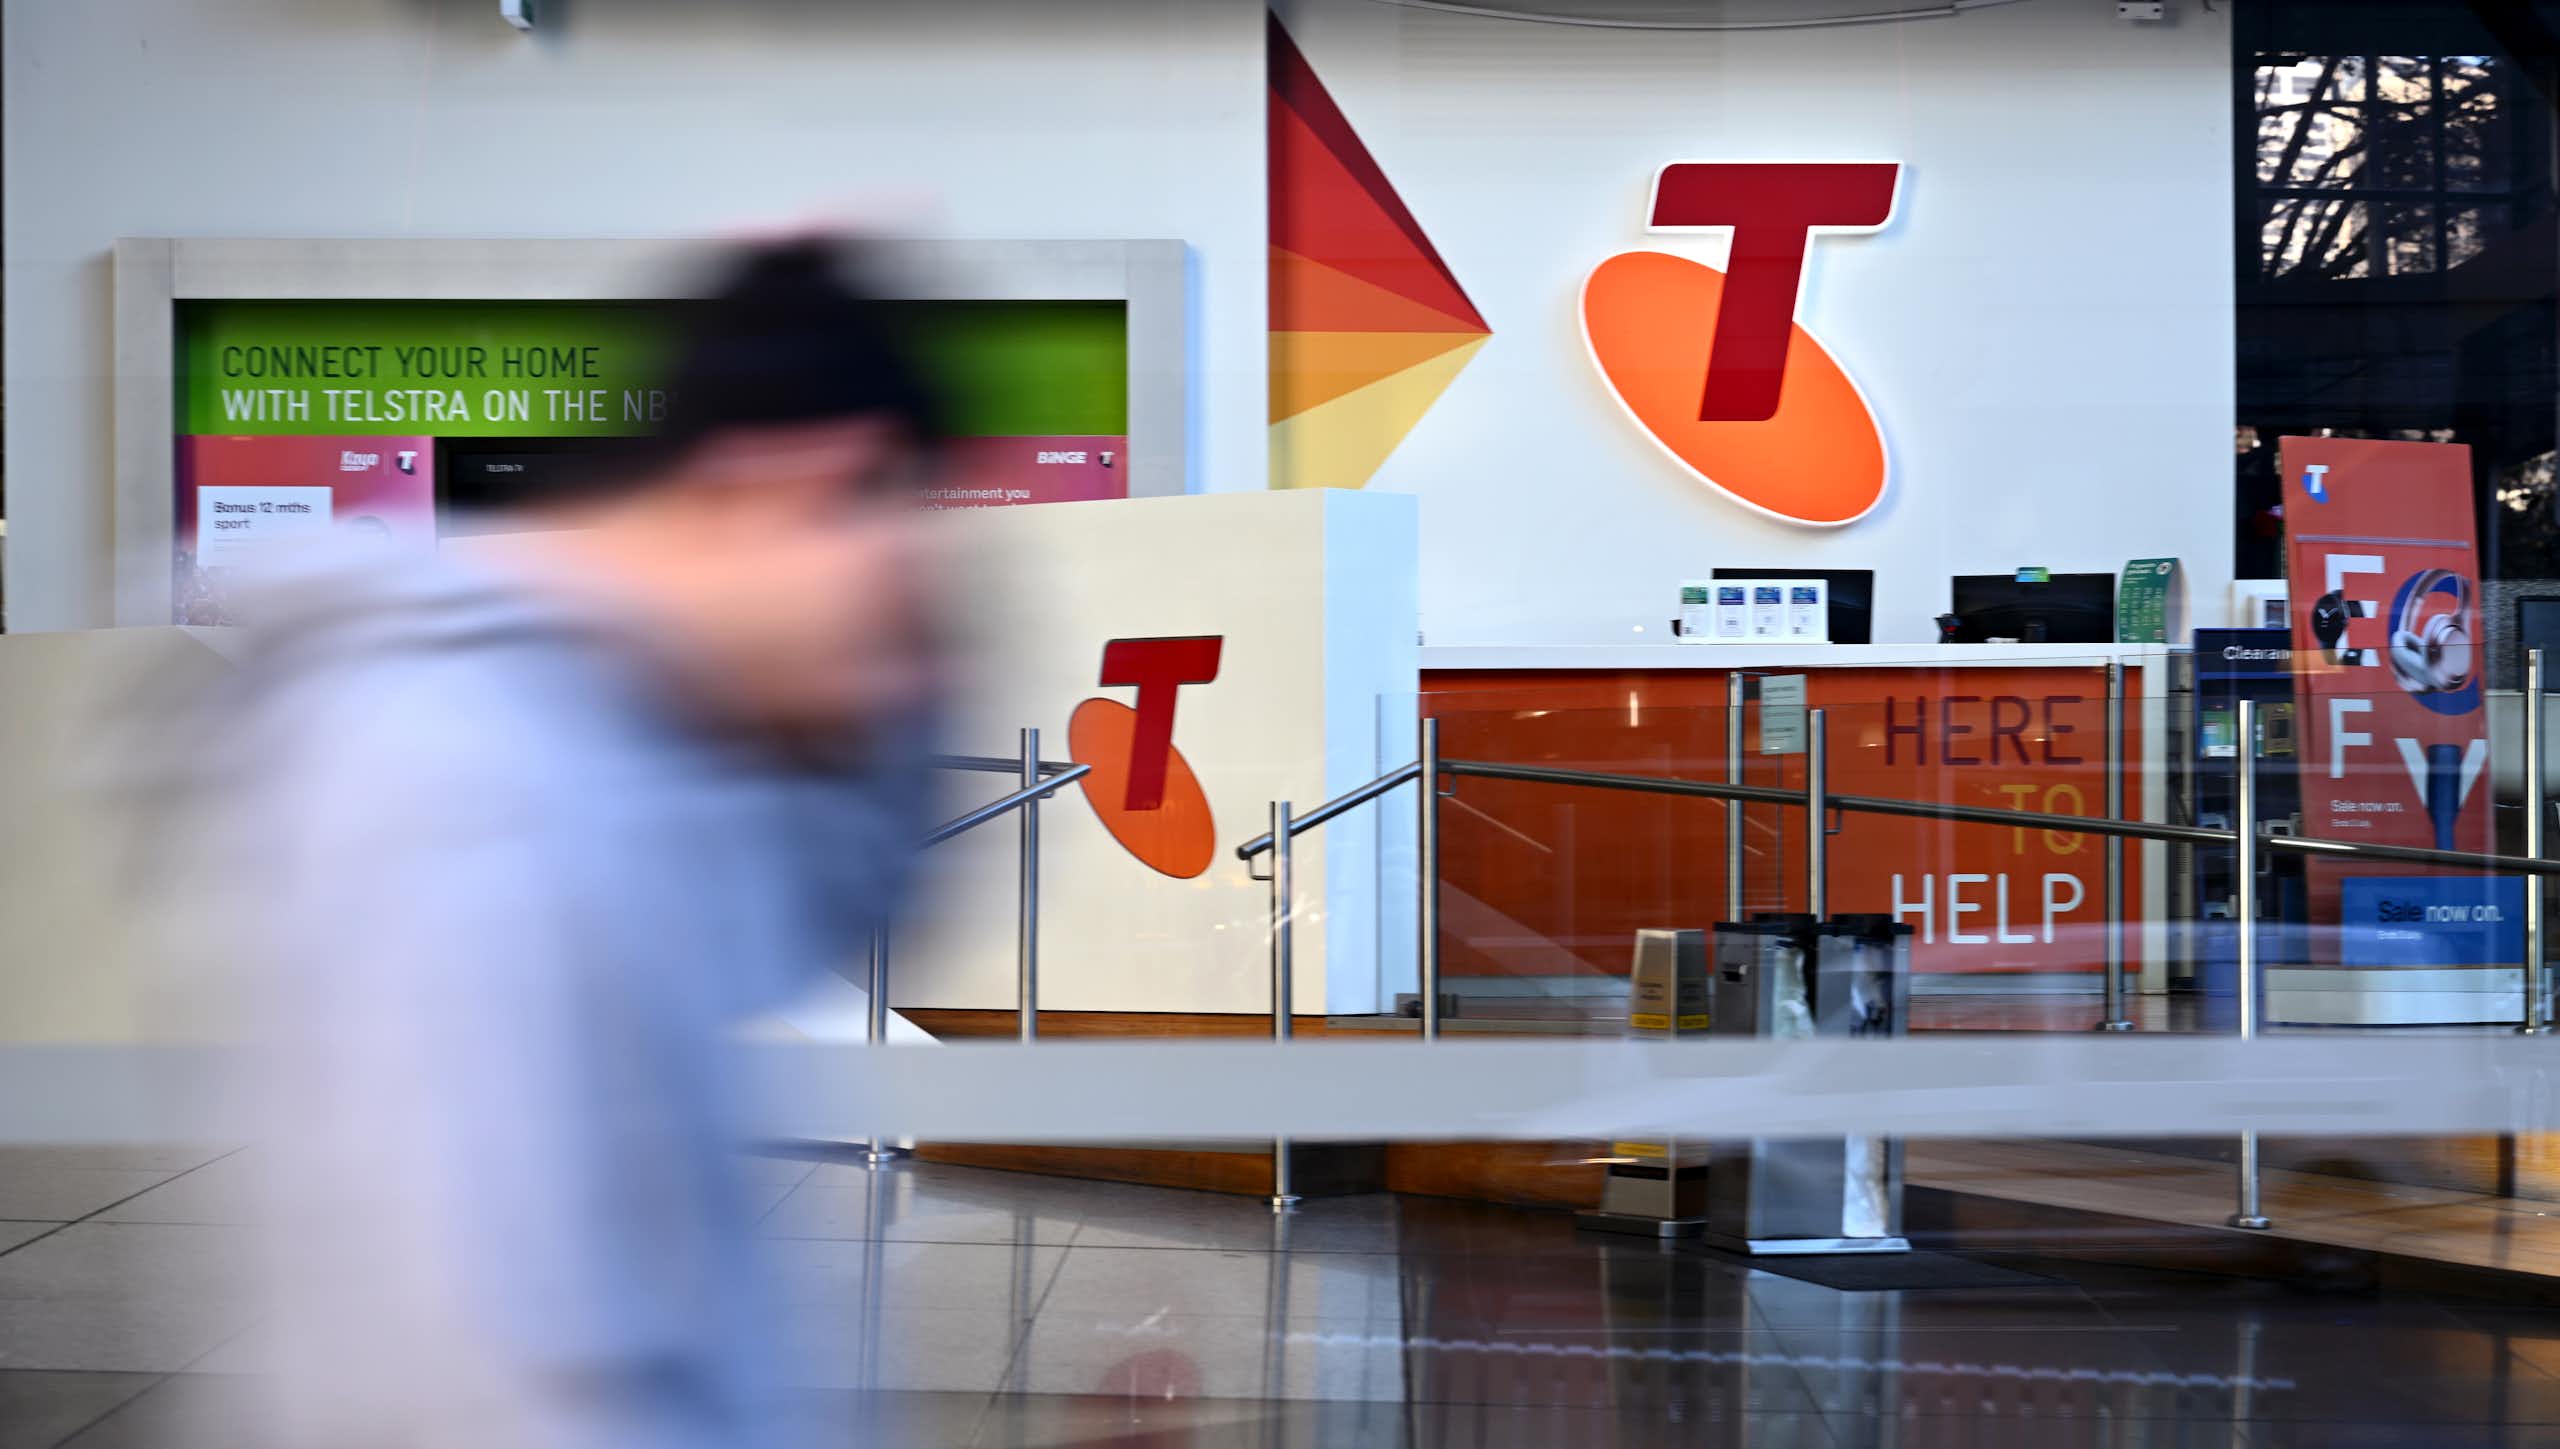 Blurred man seen walking in front of a large Telstra shop